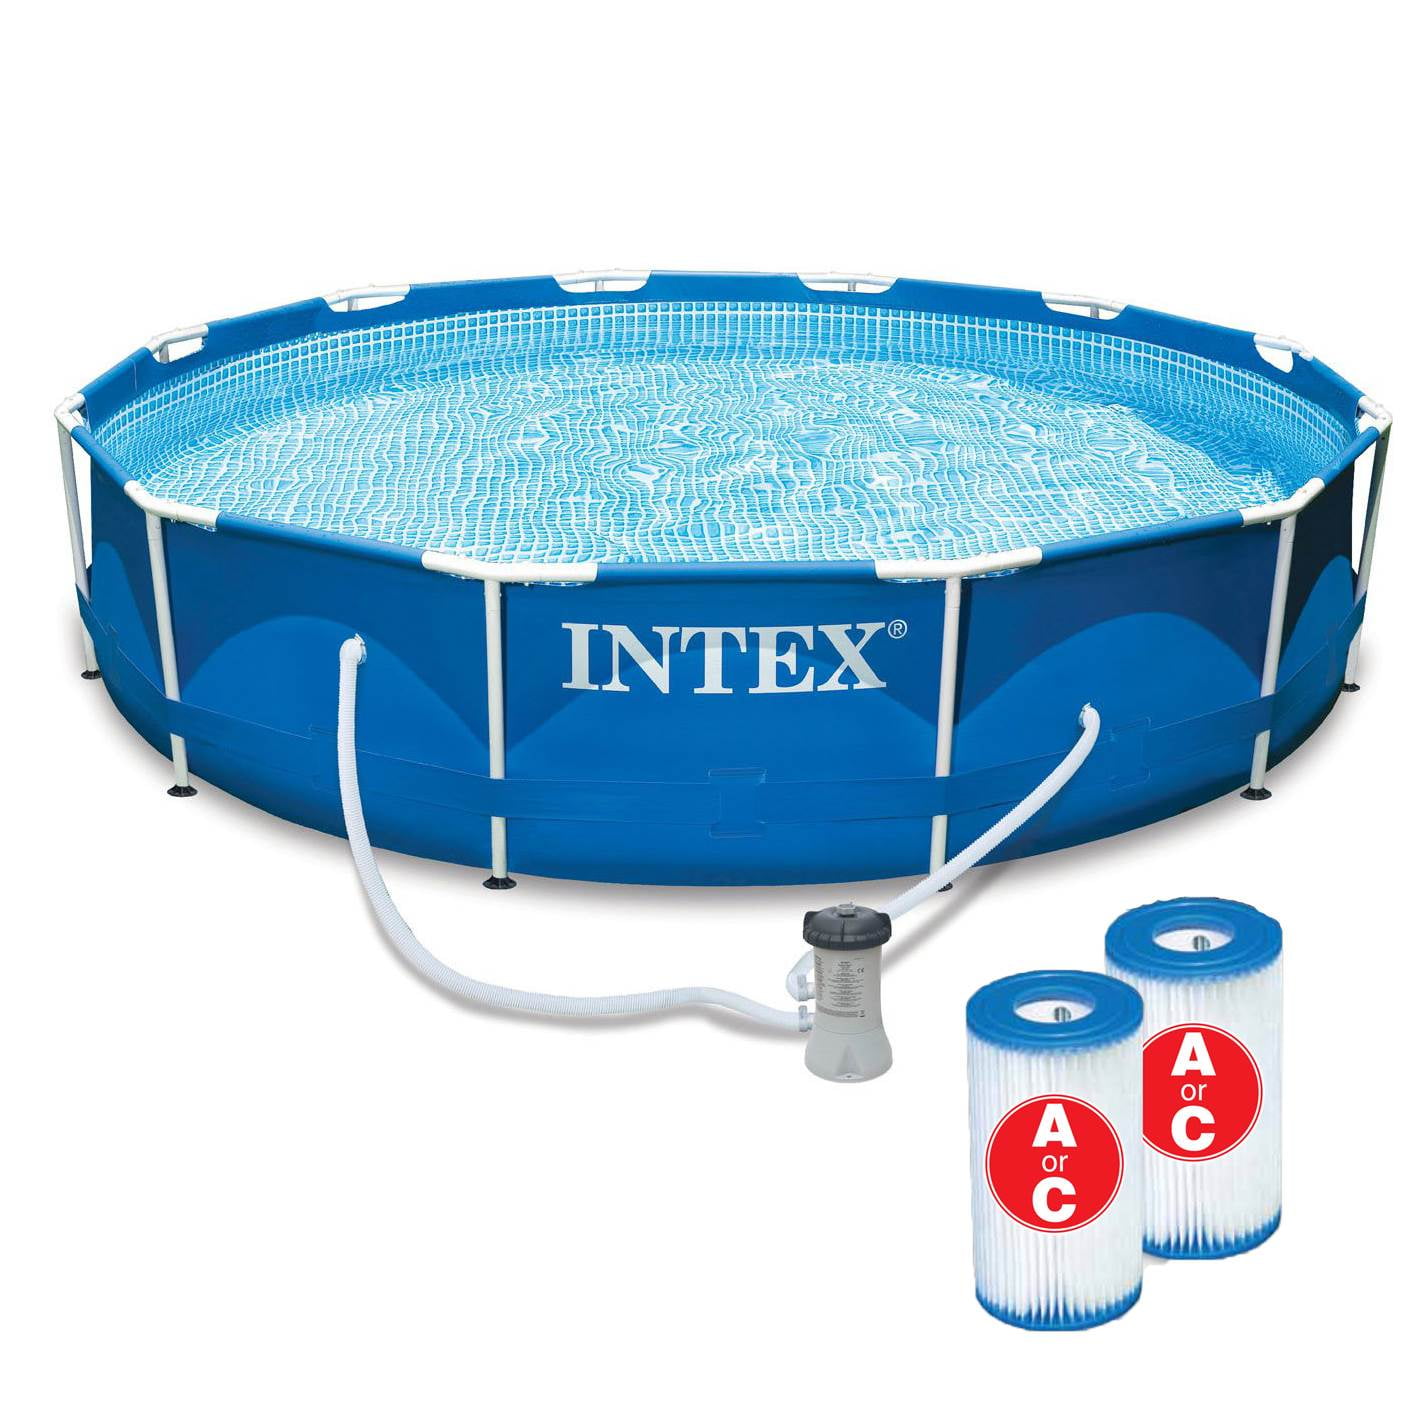 Details about   Framepool Round or Square Filter Pump Cartridge A Pool Ladder Swimming Pool Intex show original title 